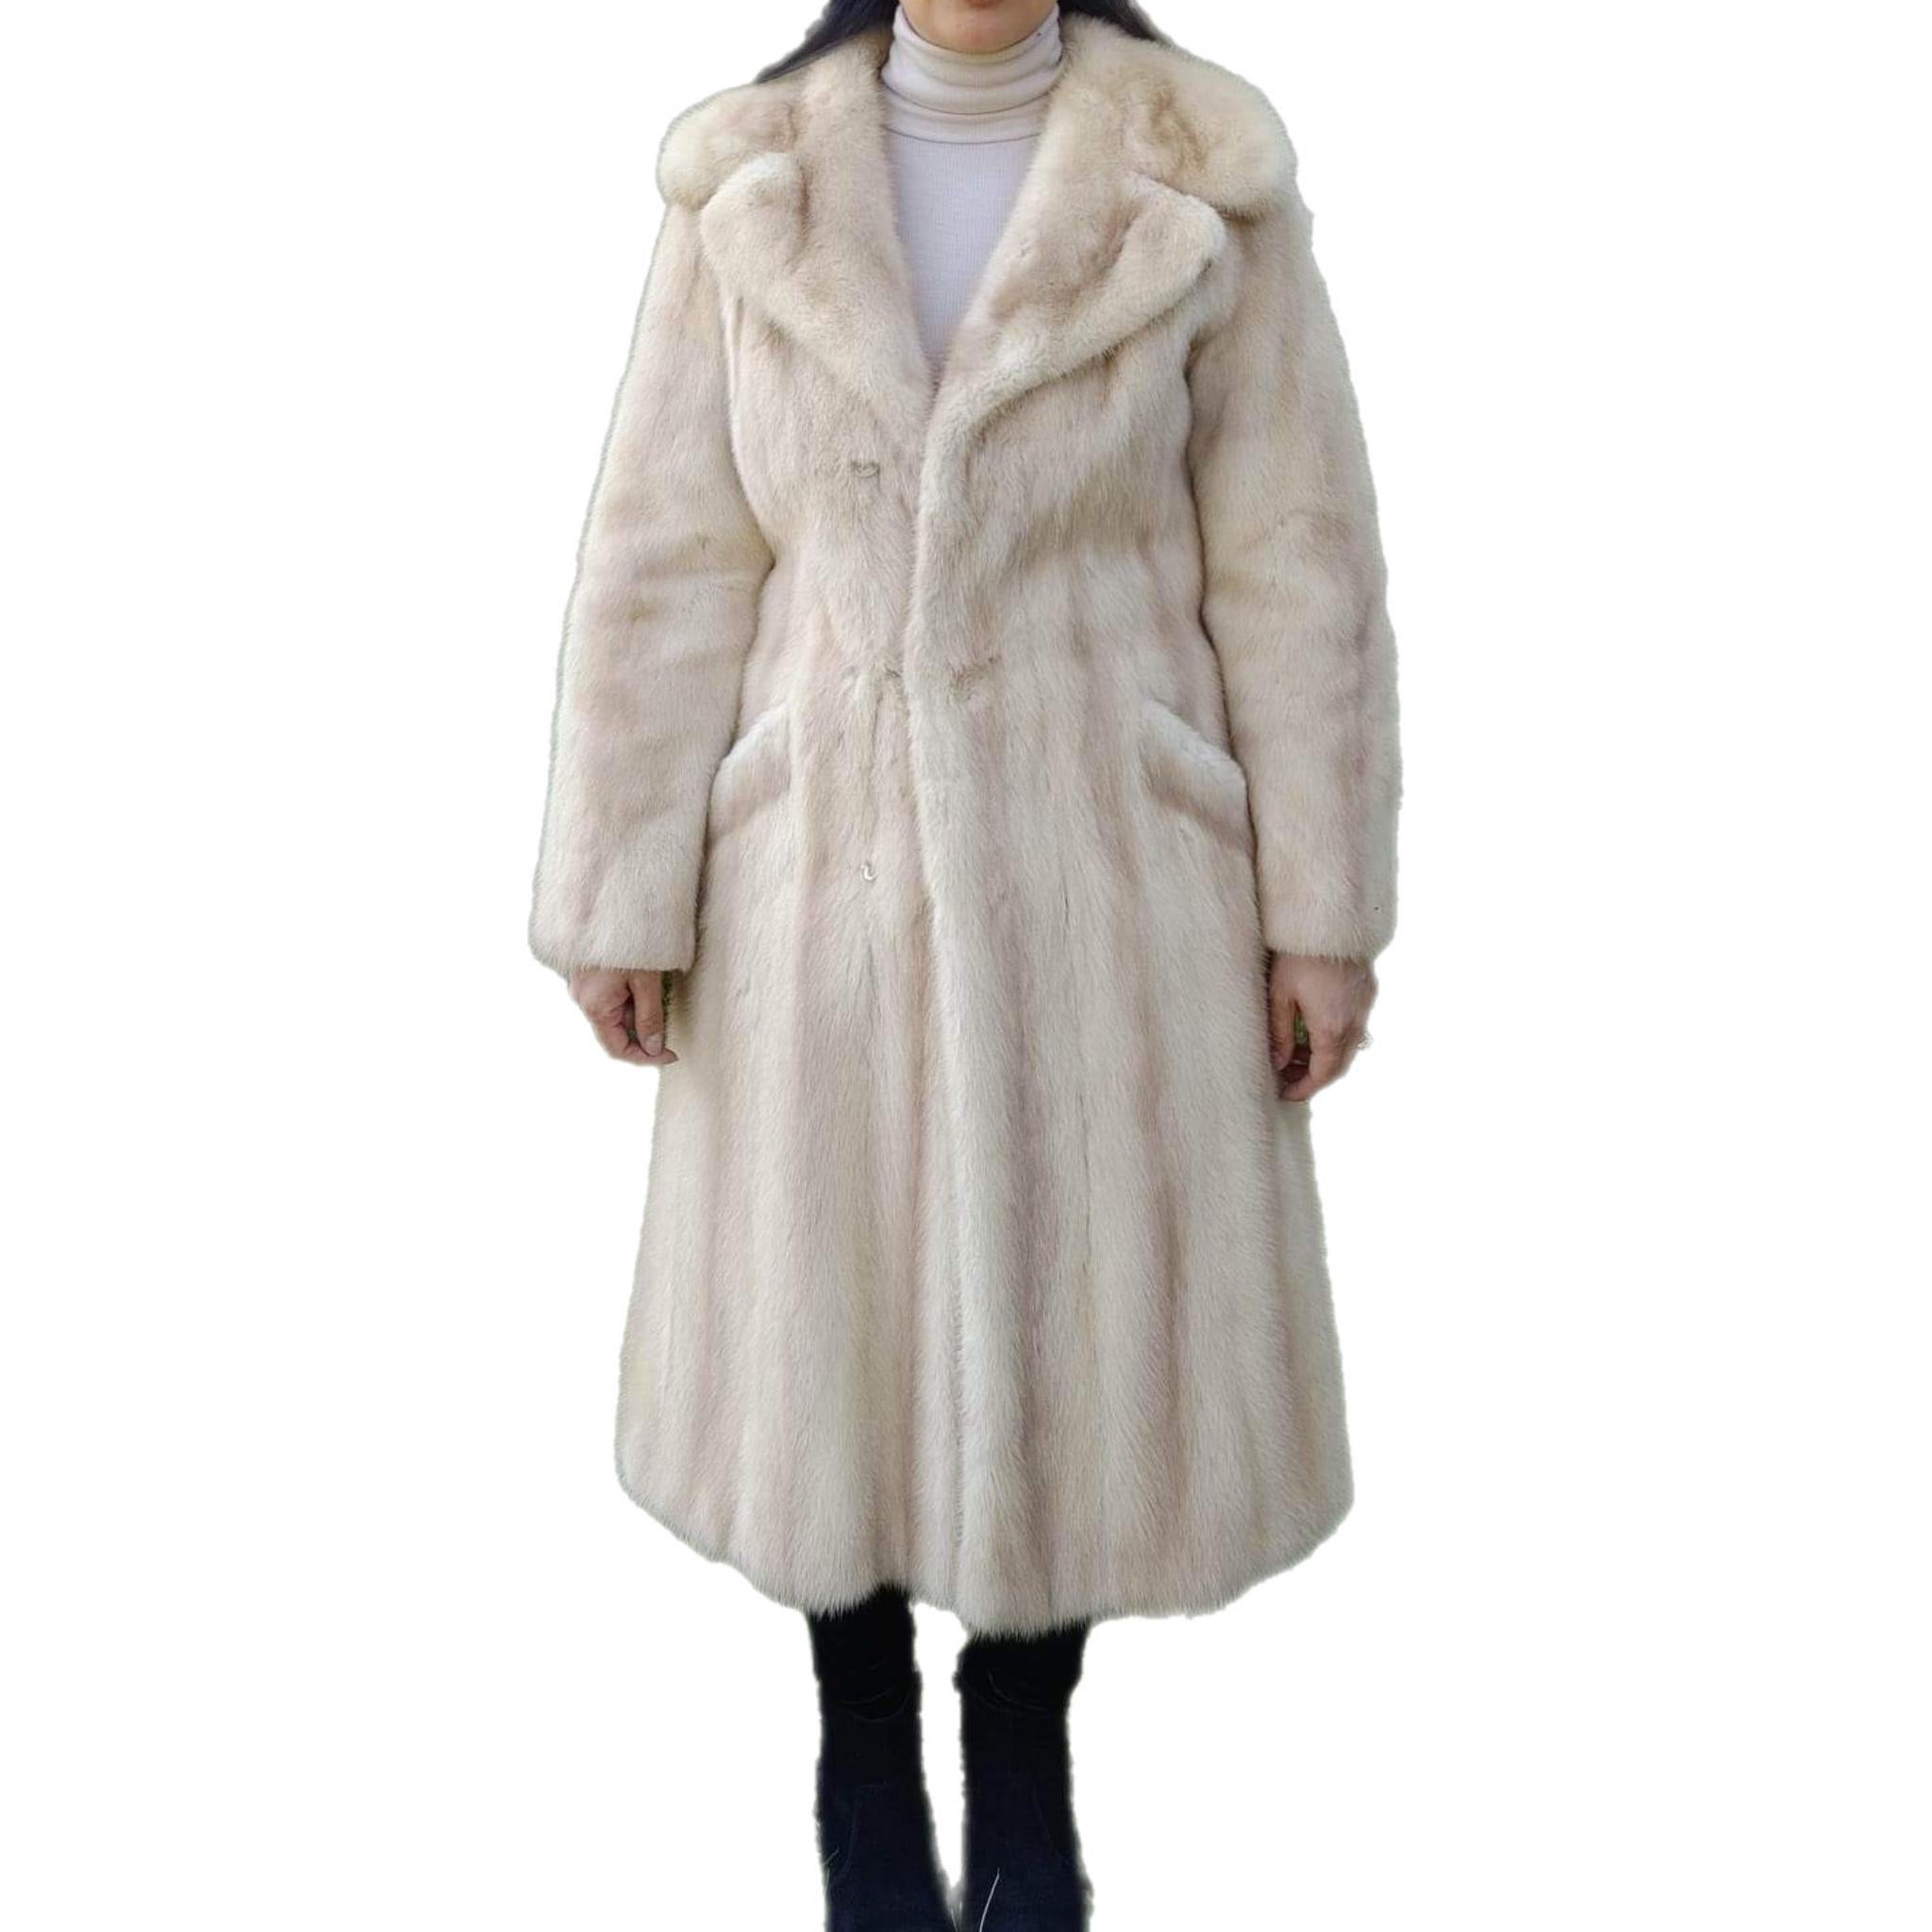 ~ Unused Blush Pastel Mink Fur Coat (Size 6- S) 

When it comes to fur, Canada Majestic is the ultimate reference in quality and style. This stunning blush coat is a classic with the stroller design and notch collar stitching workmanship. It has a